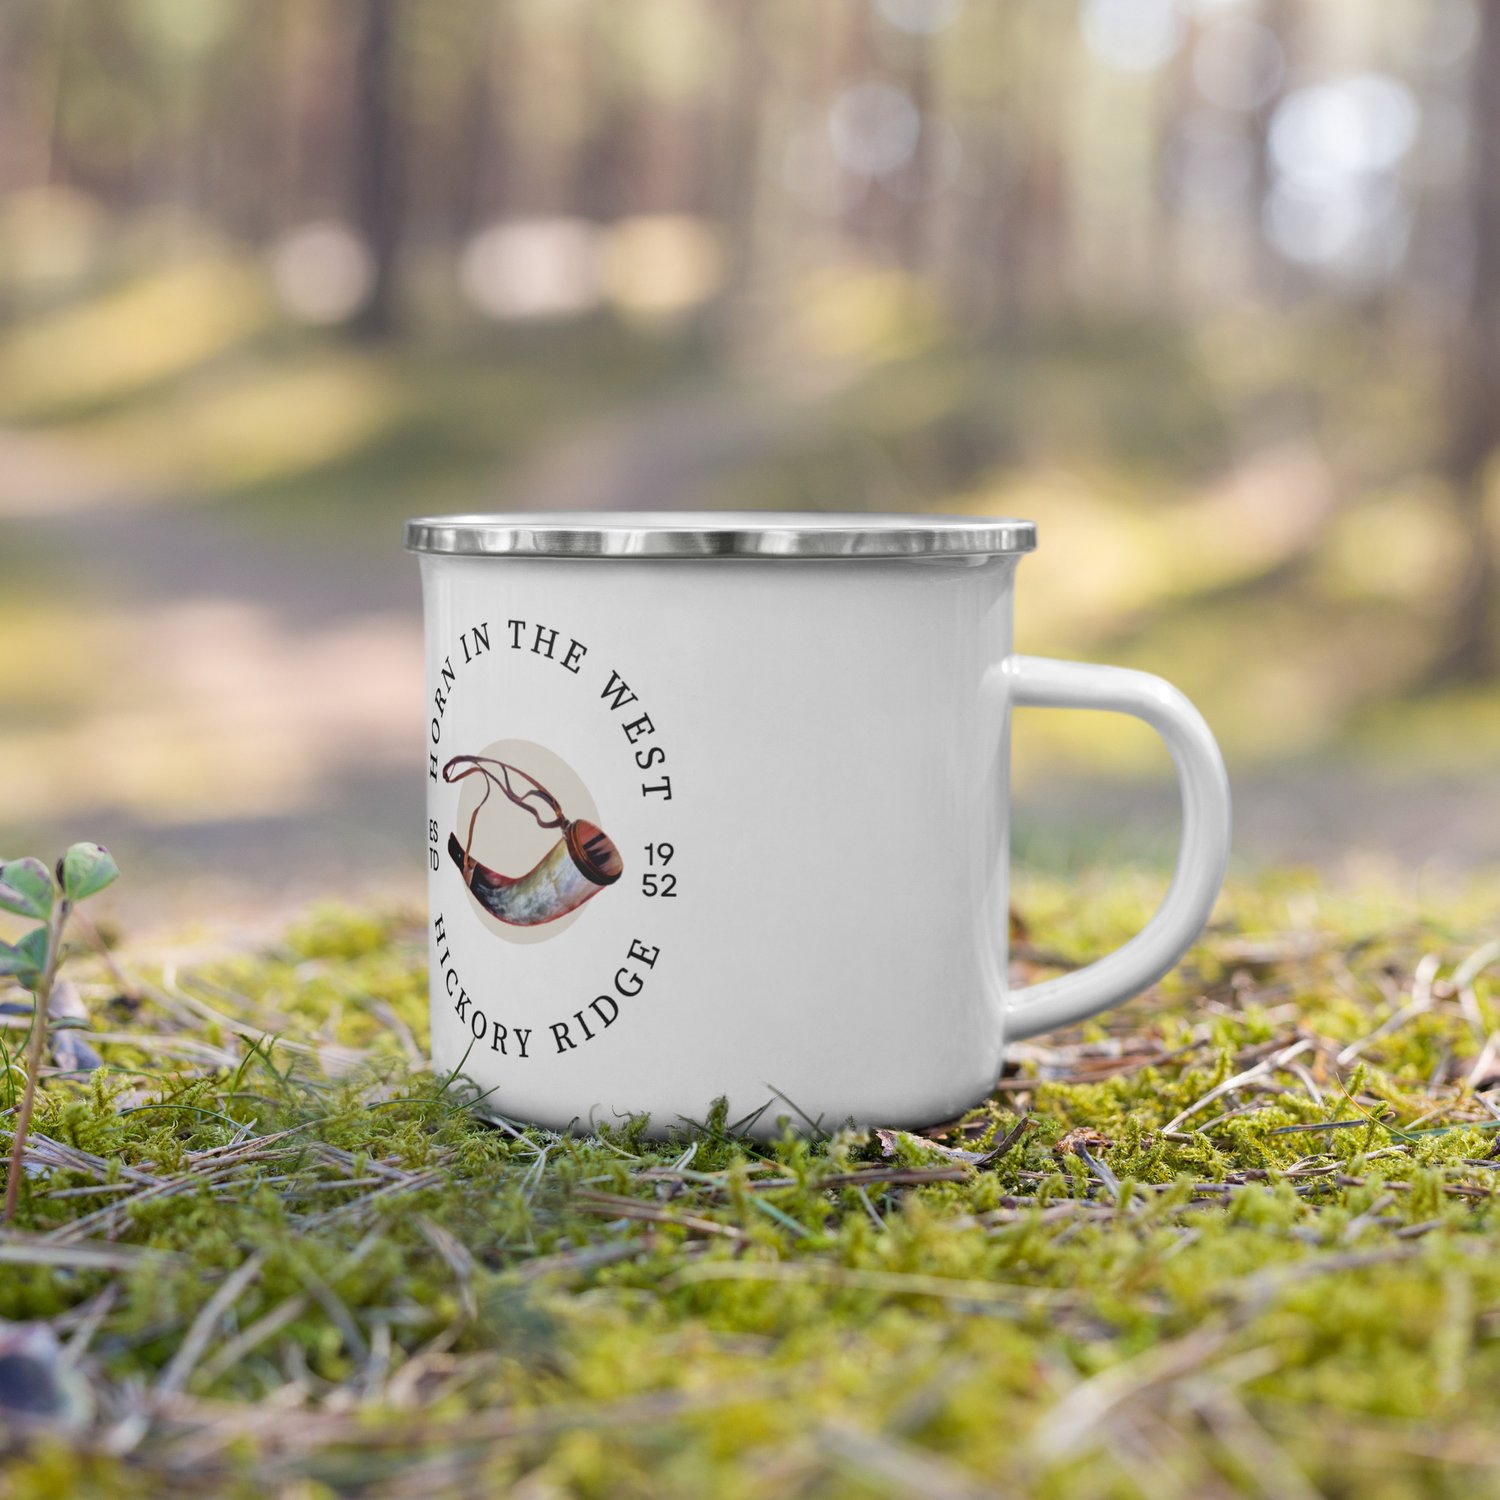 Southern Appalachian Historical Association Camping Enamel Mug — Southern  Appalachian Historical Association: Horn in the West Outdoor Drama &  Hickory Ridge Living History Museum